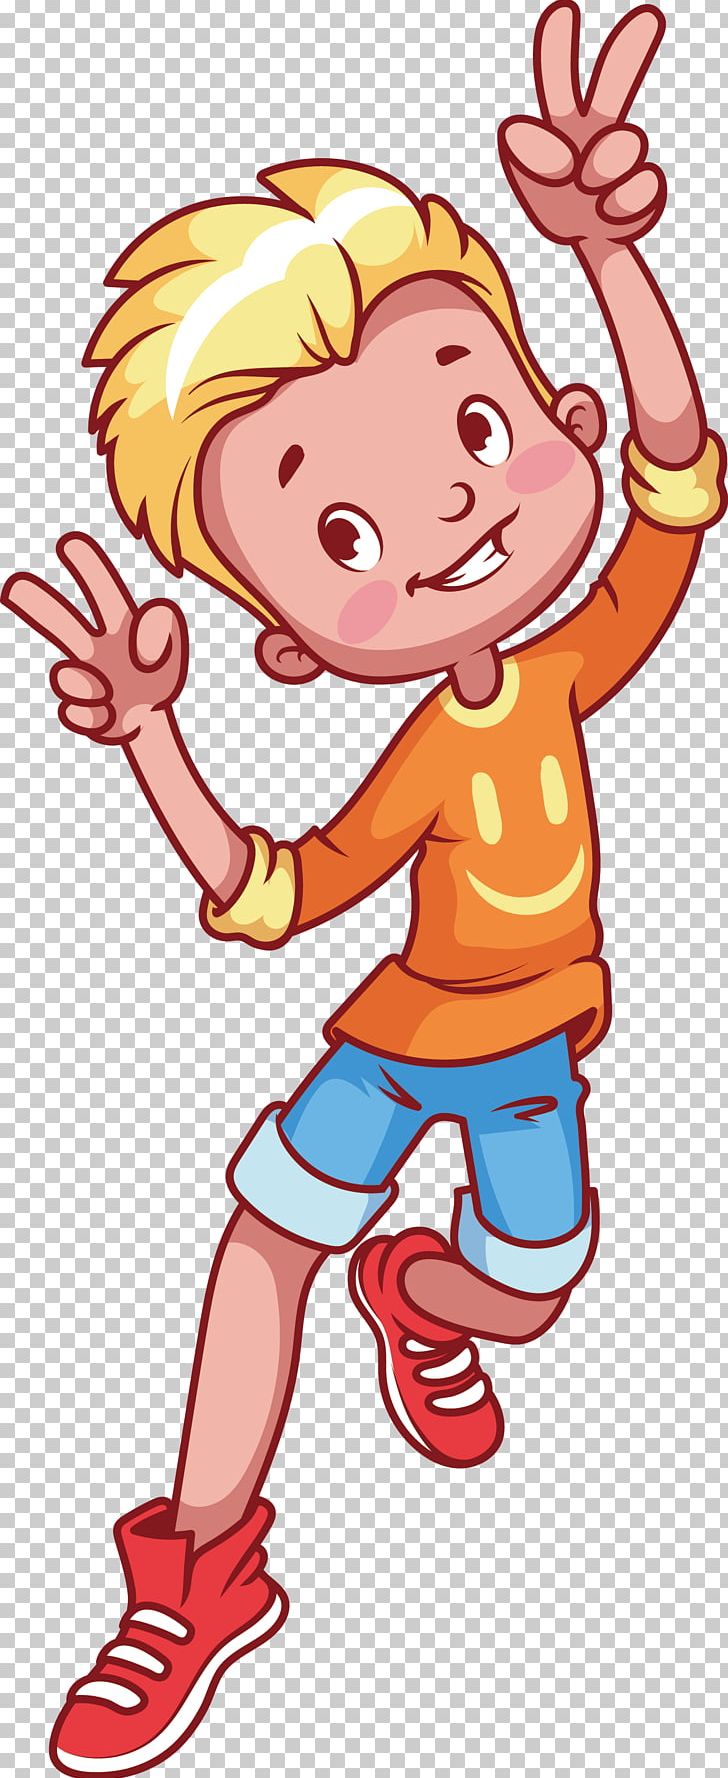 Child Cartoon PNG, Clipart, Arm, Boy, Boy Vector, Cartoon Characters, Fictional Character Free PNG Download